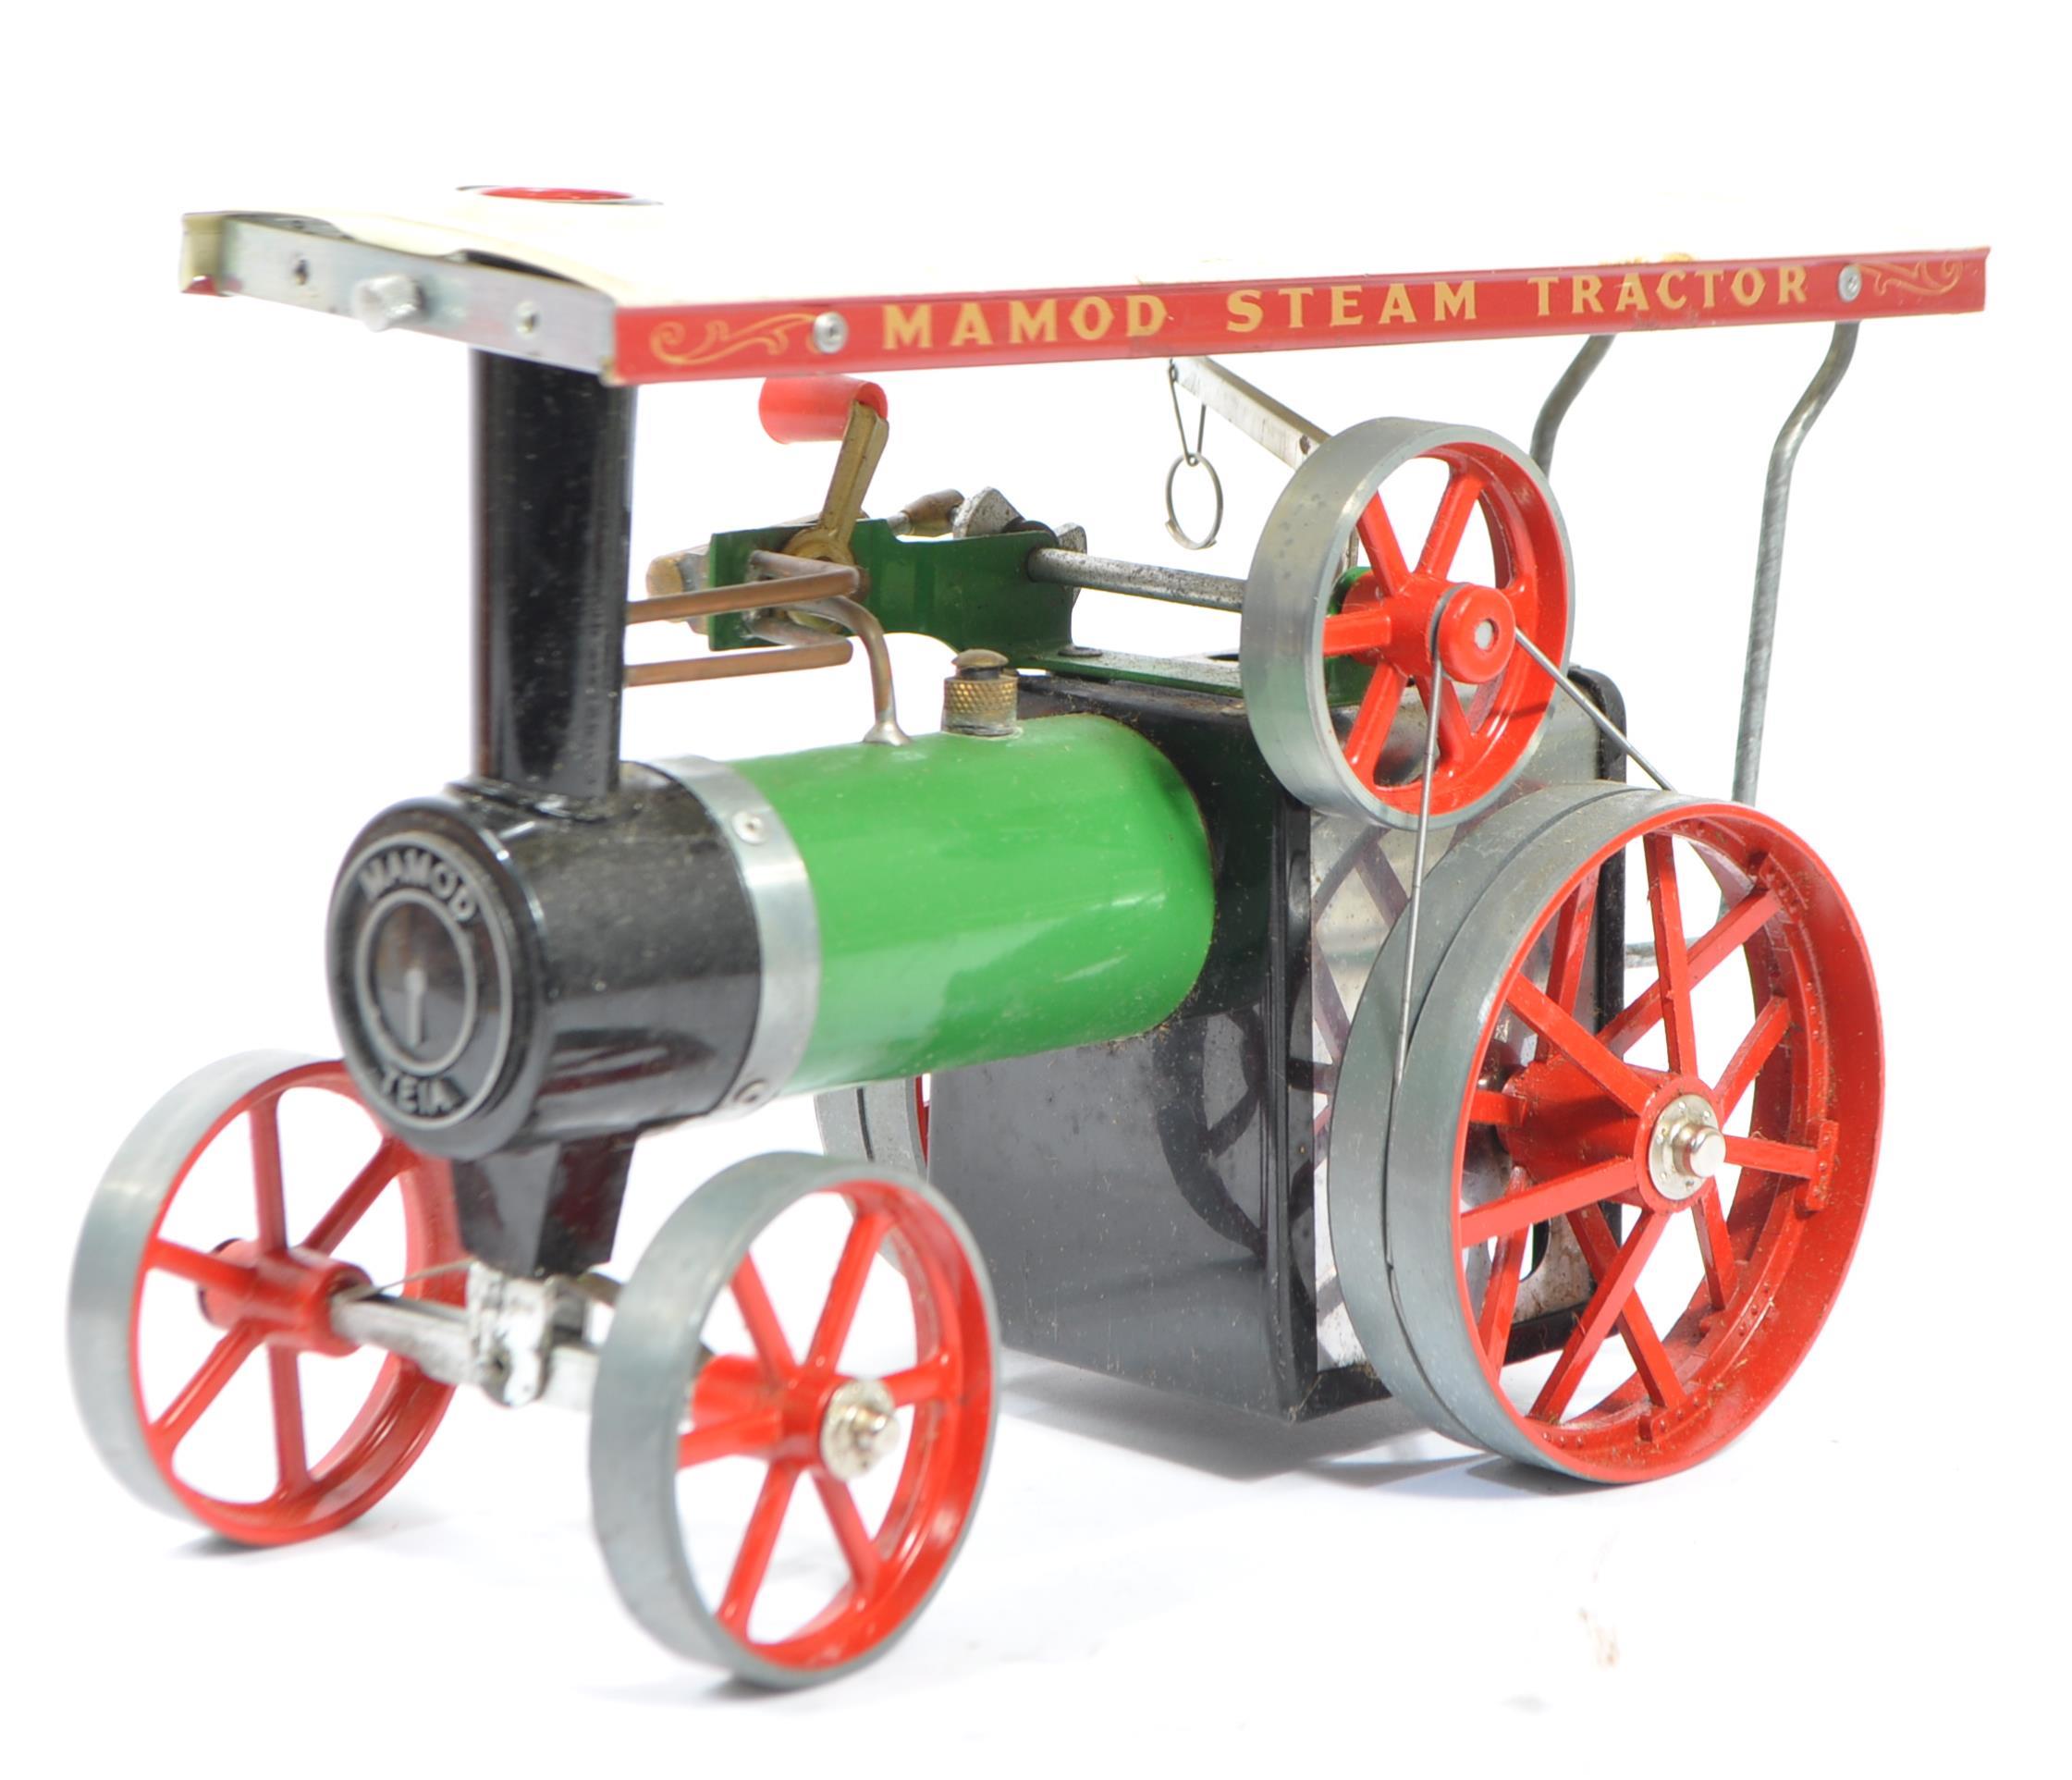 MAMOD STEAM TRACTOR MODEL TE1A TRACTION ENGINE - Image 2 of 4